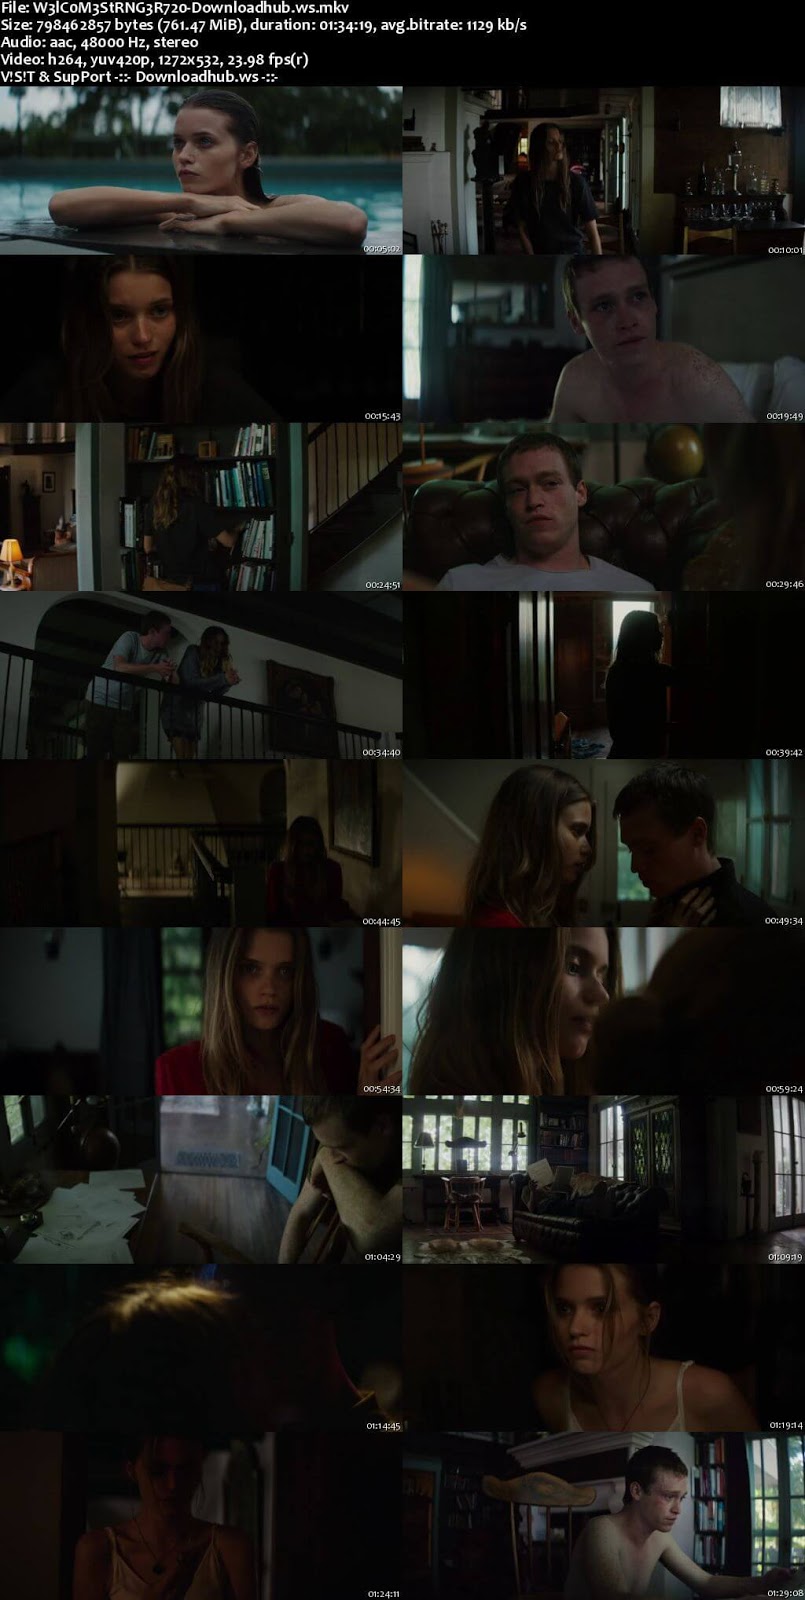 Welcome the Stranger 2018 English 720p Web-DL 750MB ESubs